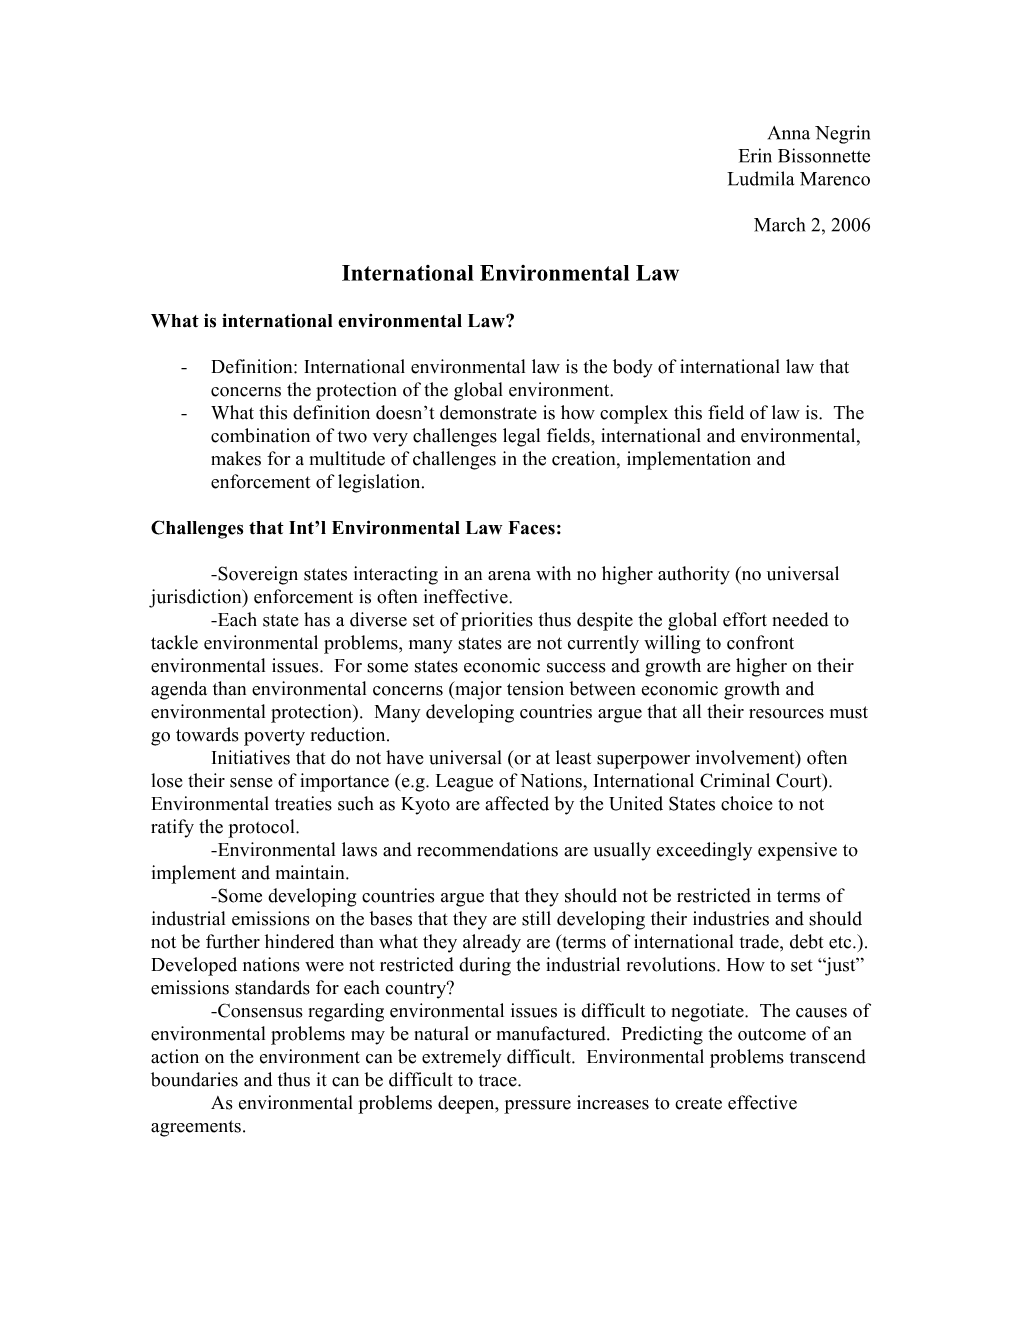 Sources of Int L Environmental Law